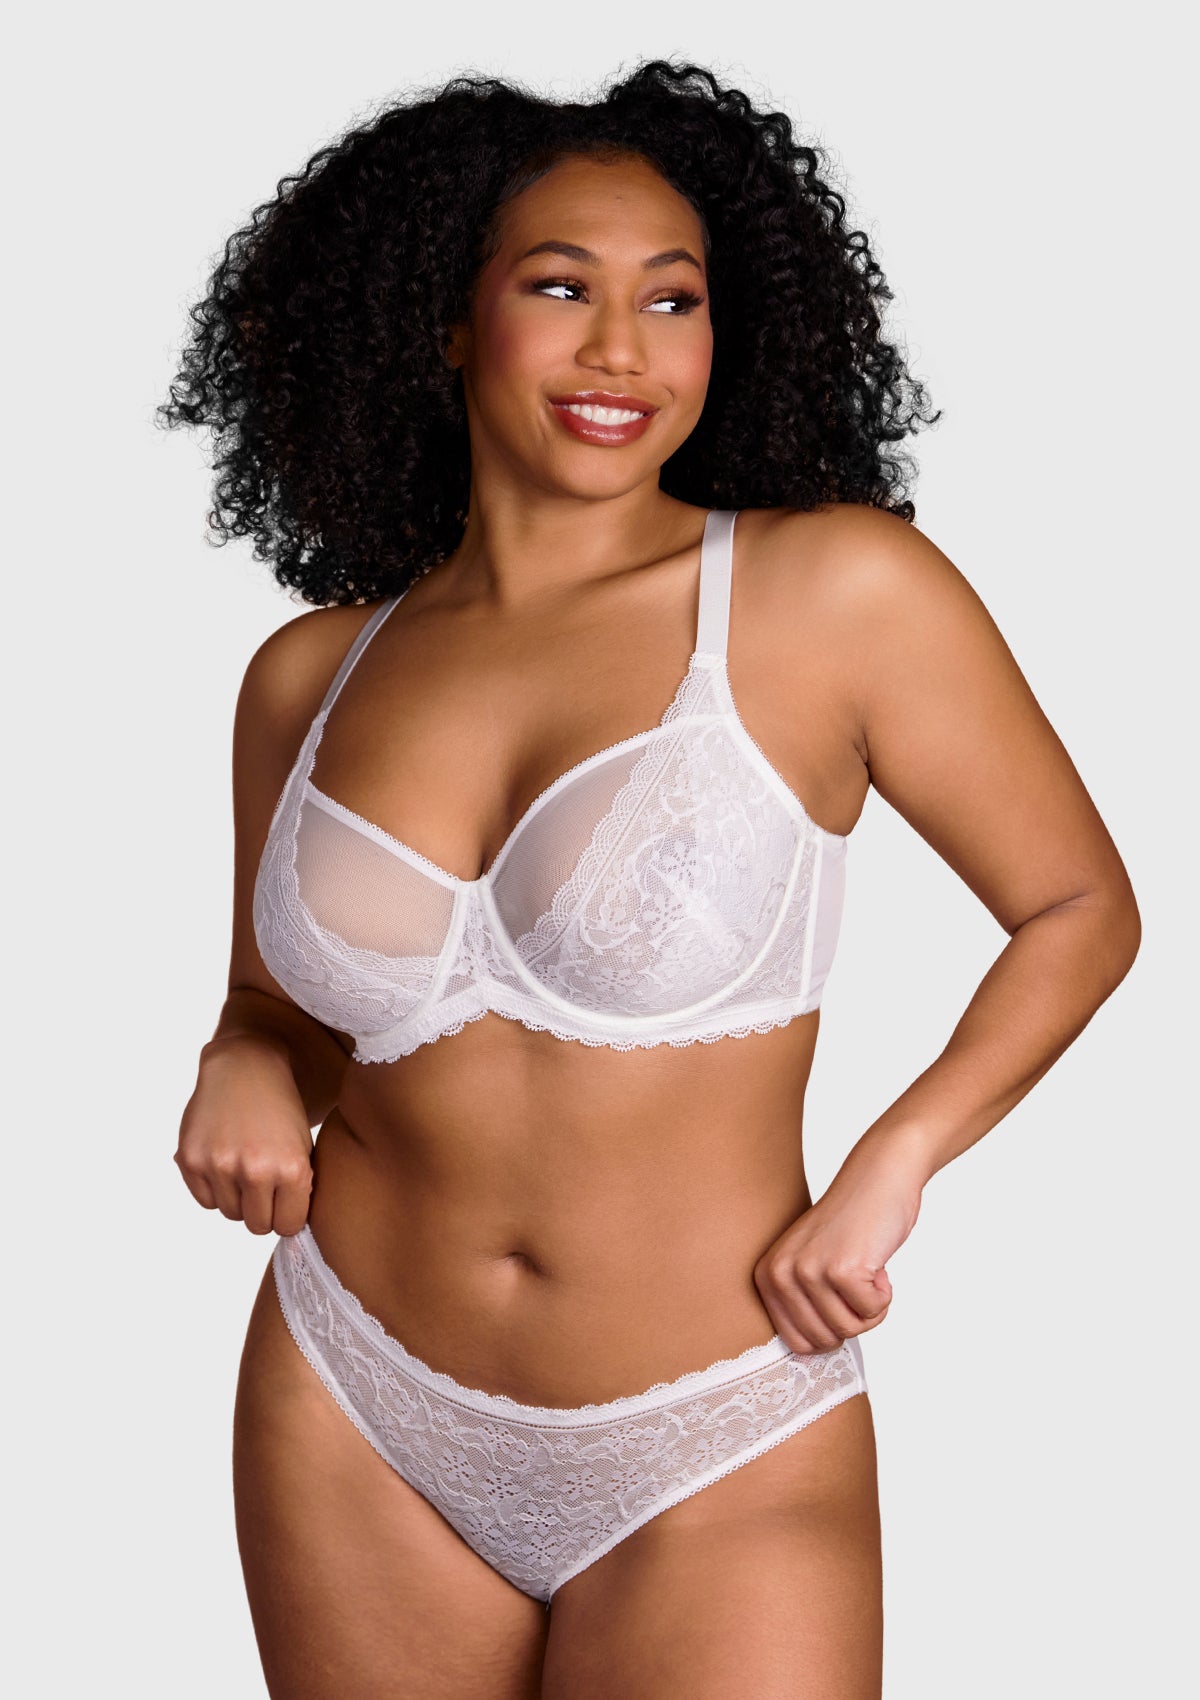 HSIA Anemone Big Bra: Best Bra For Lift And Support, Floral Bra - Burgundy / 40 / D